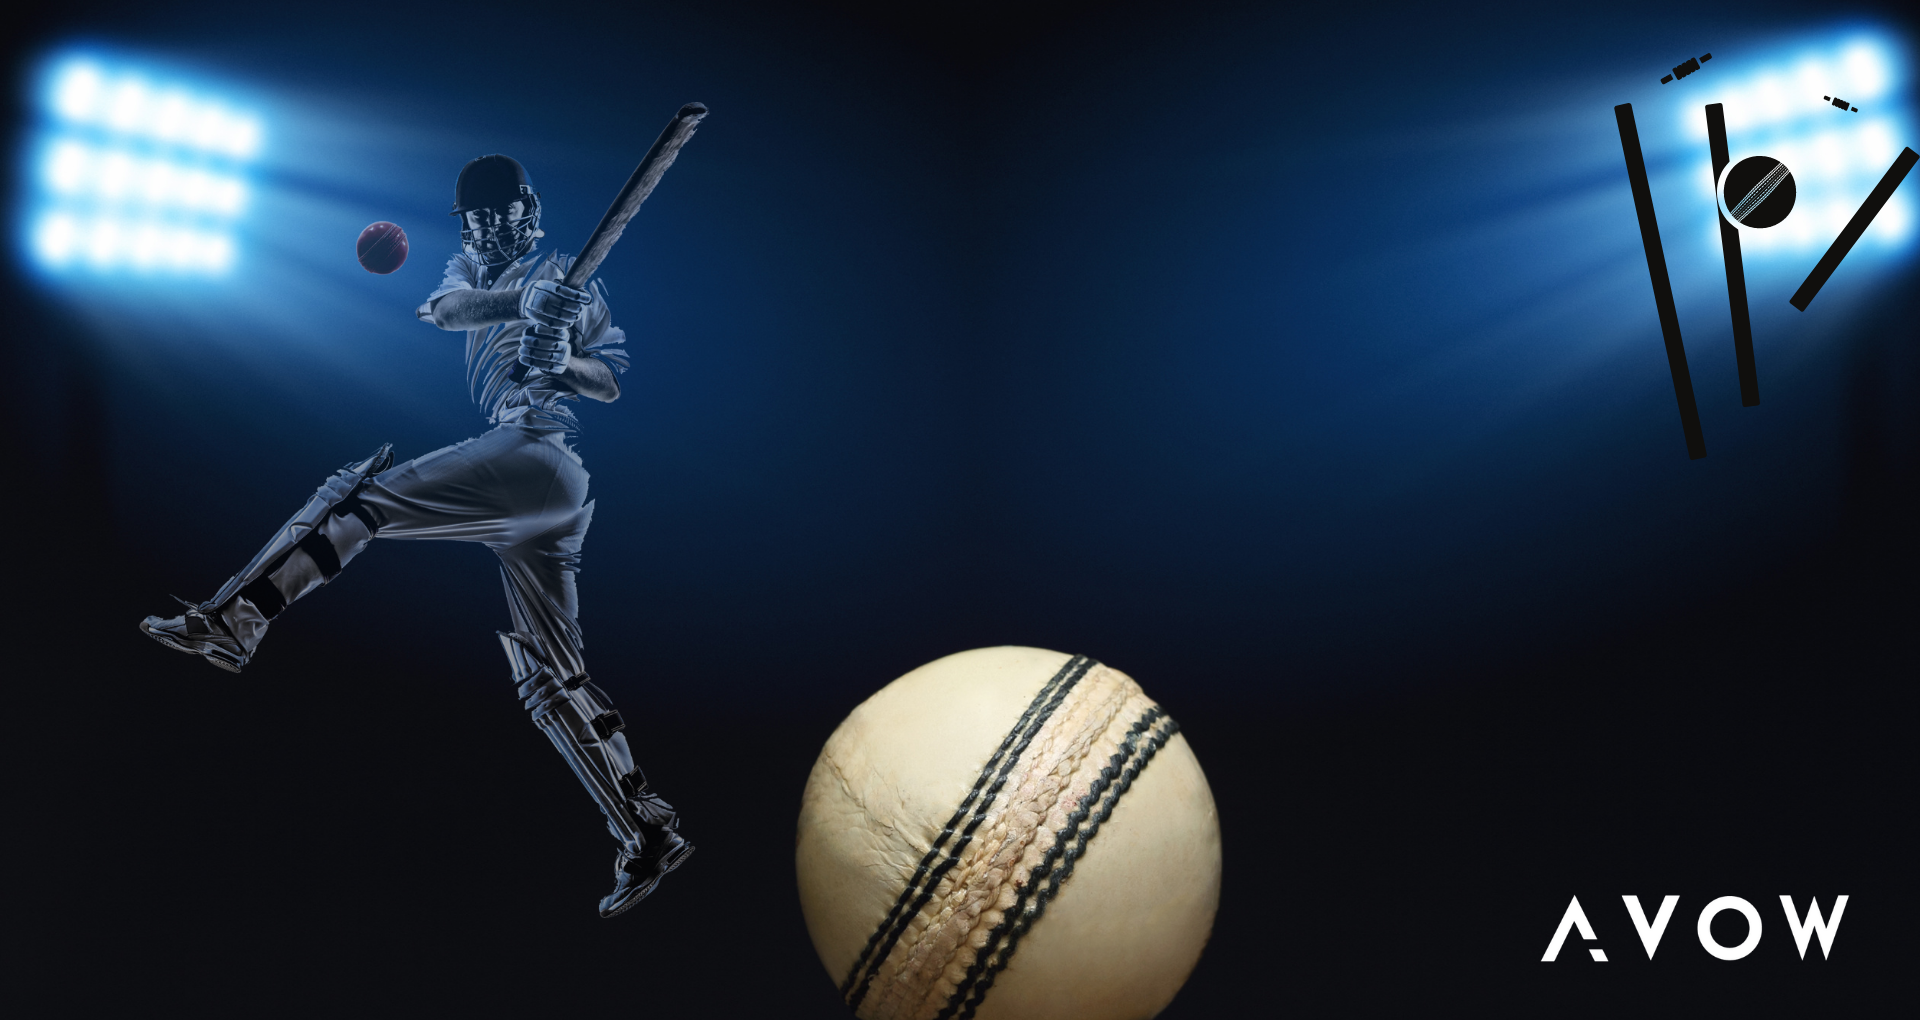 How Mobile Apps can leverage Mobile OEMs during IPL to Advertise Big